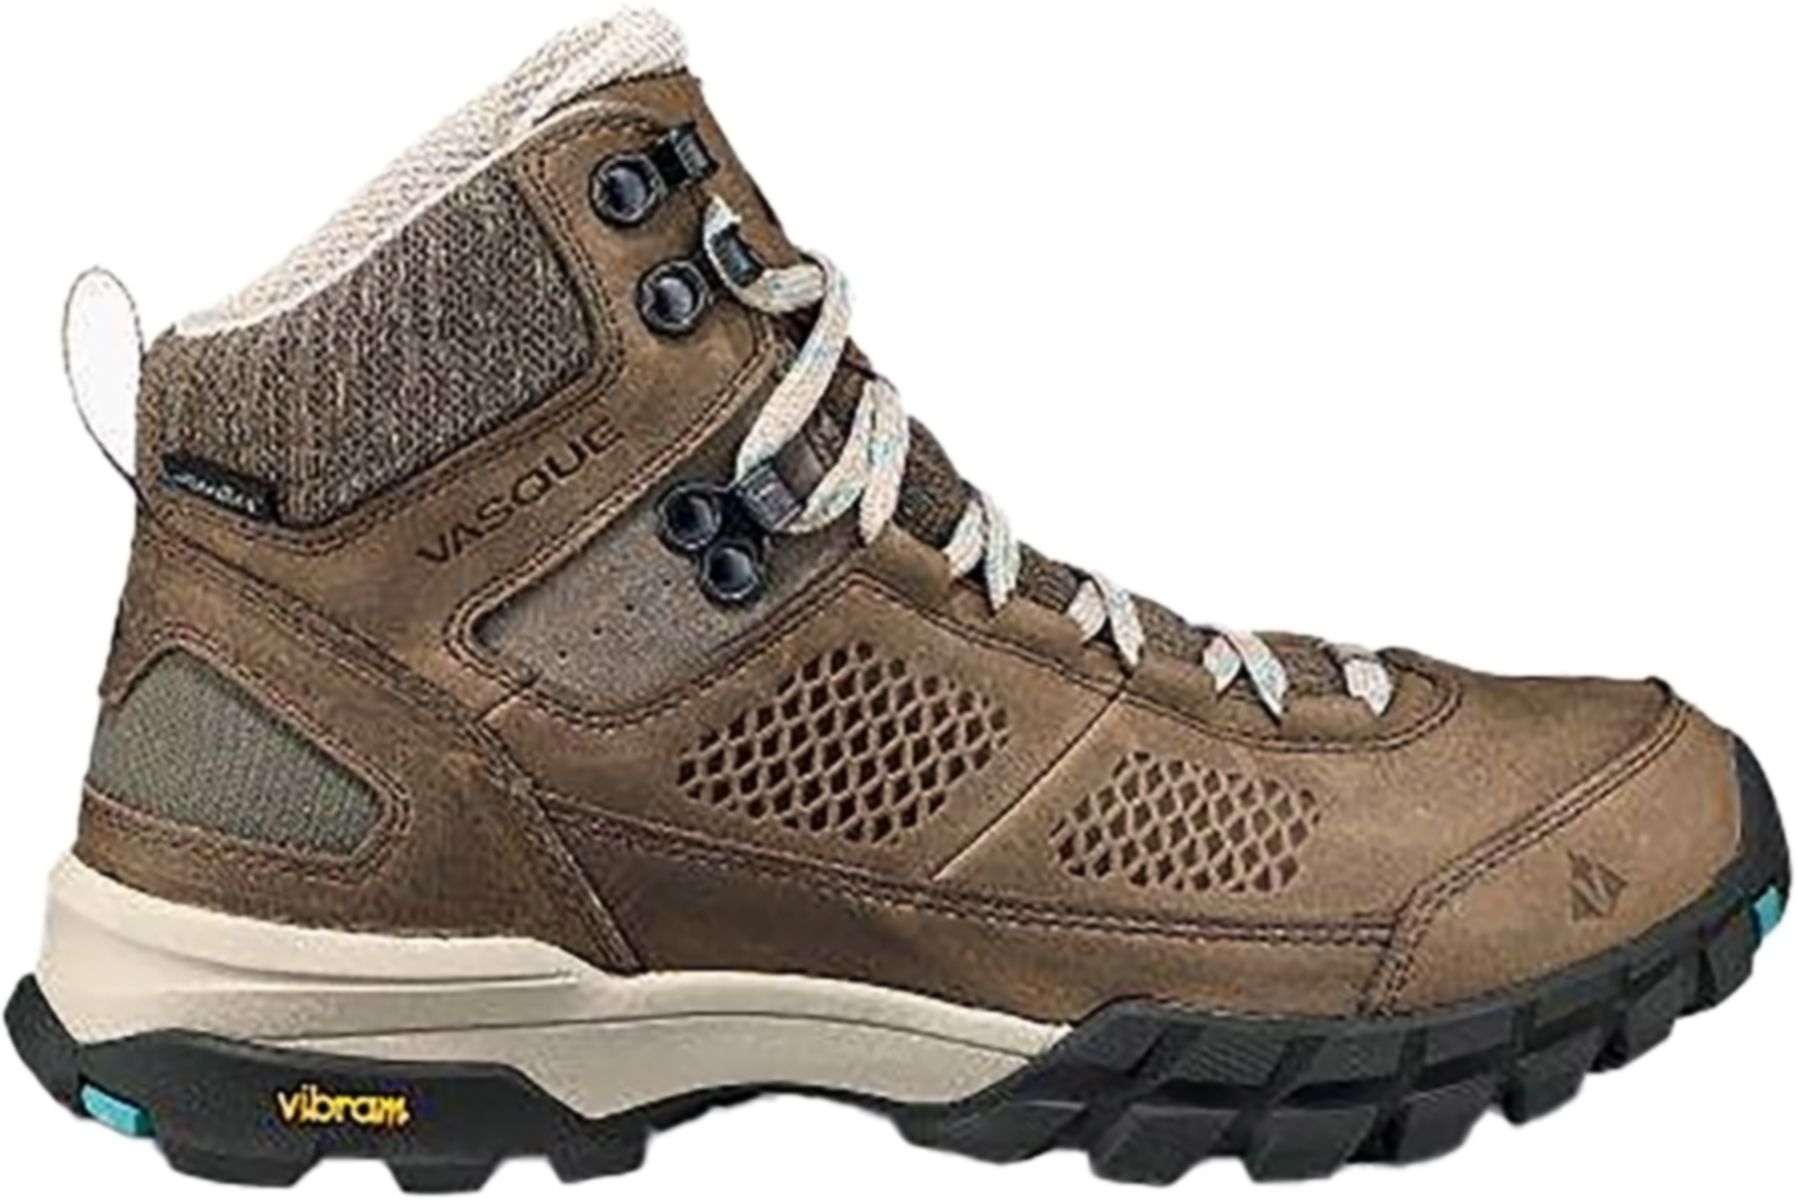 Photos - Trekking Shoes Vasque Women's Talus All-Terrain UltraDry Hiking Boots, Size 7.5, Brindle 